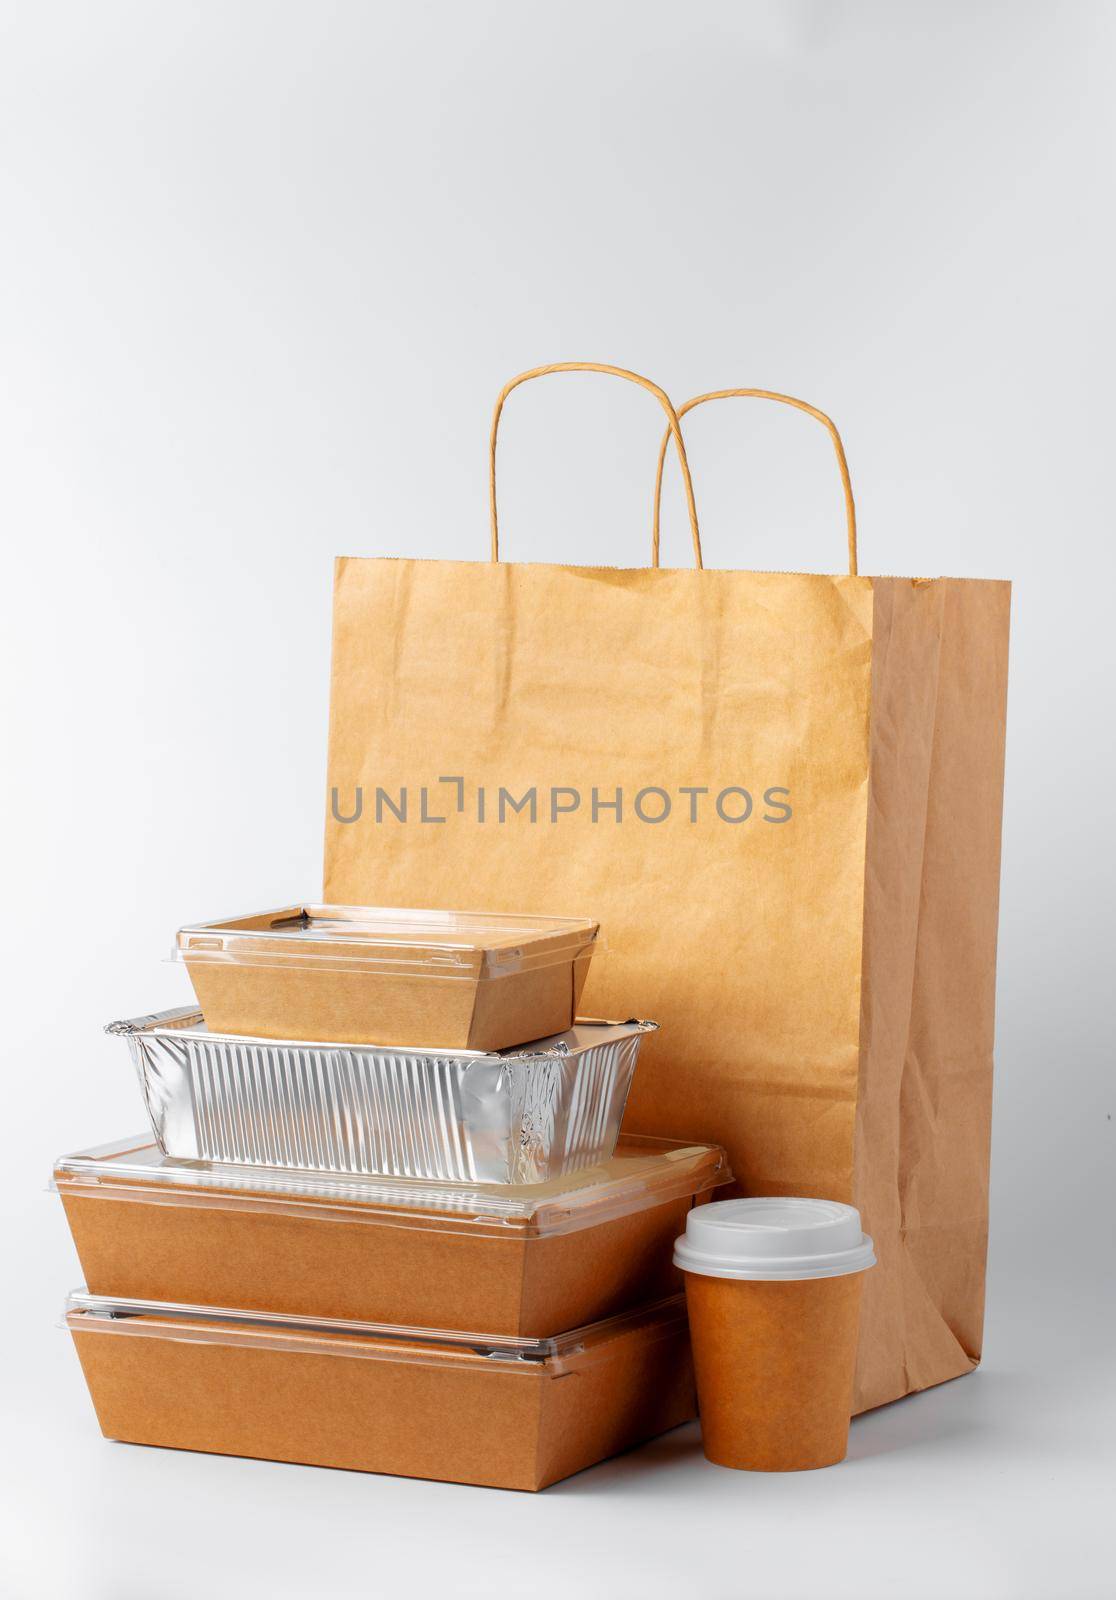 Set of recyclable food packaging on white background by Fabrikasimf